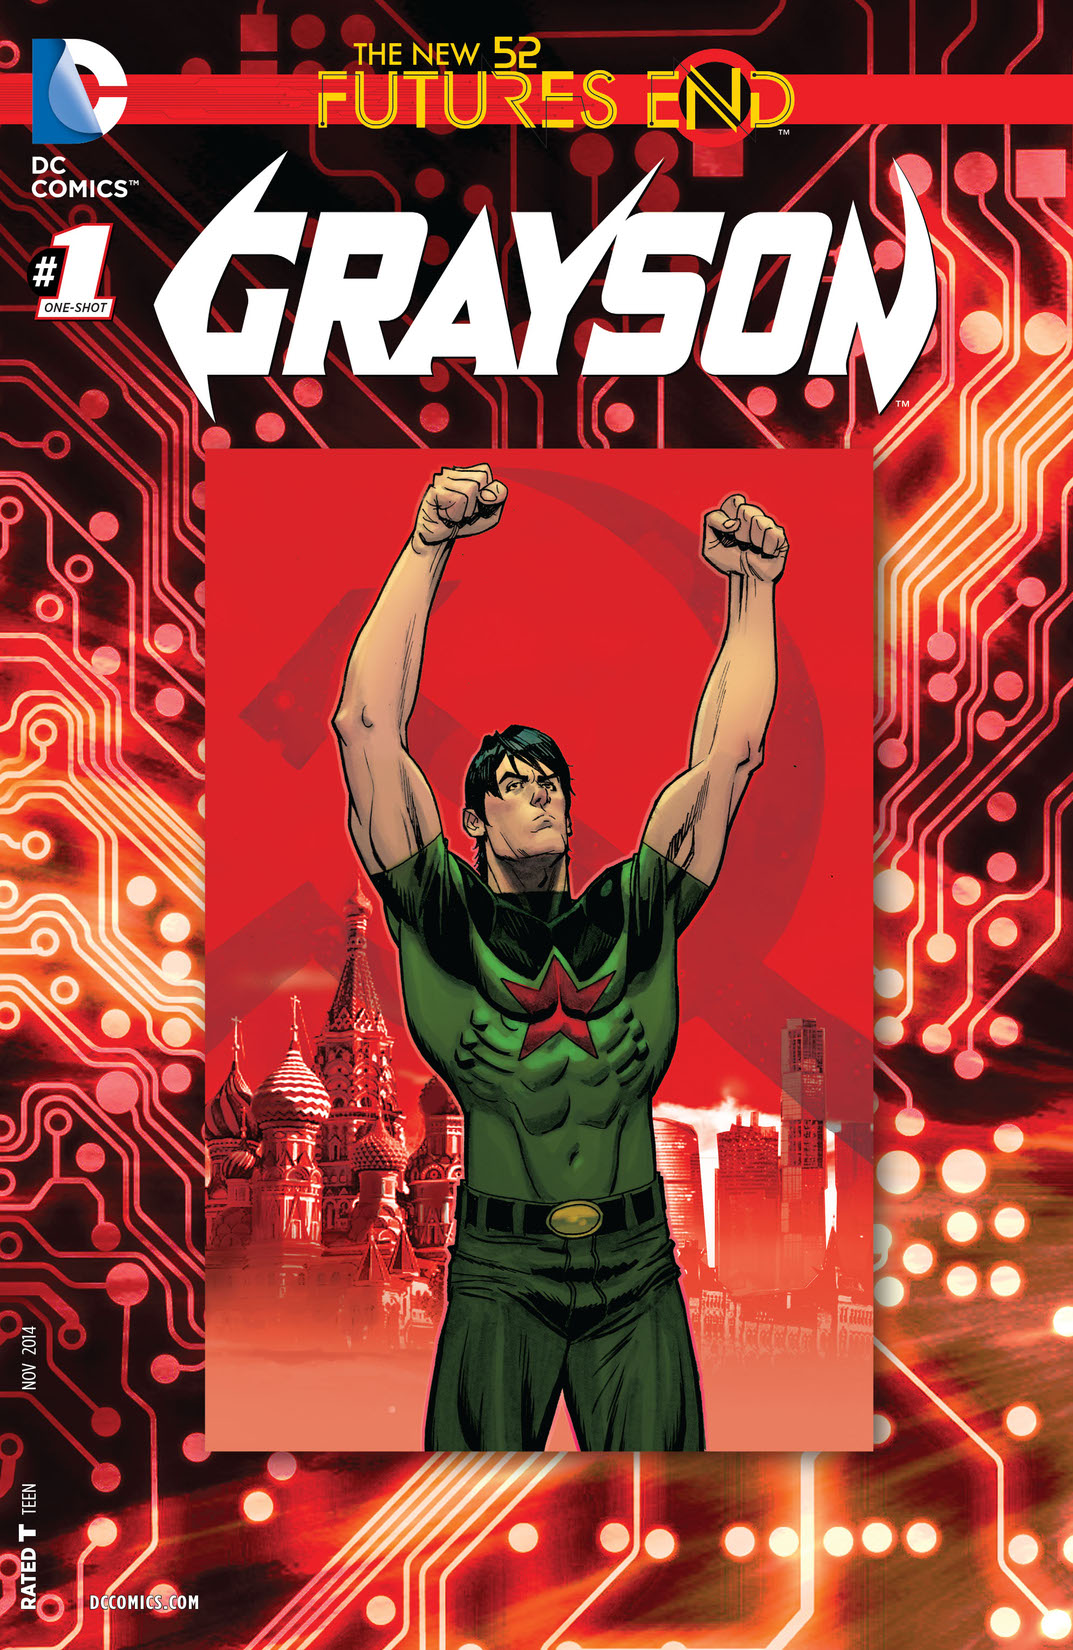 Grayson: Futures End #1 preview images